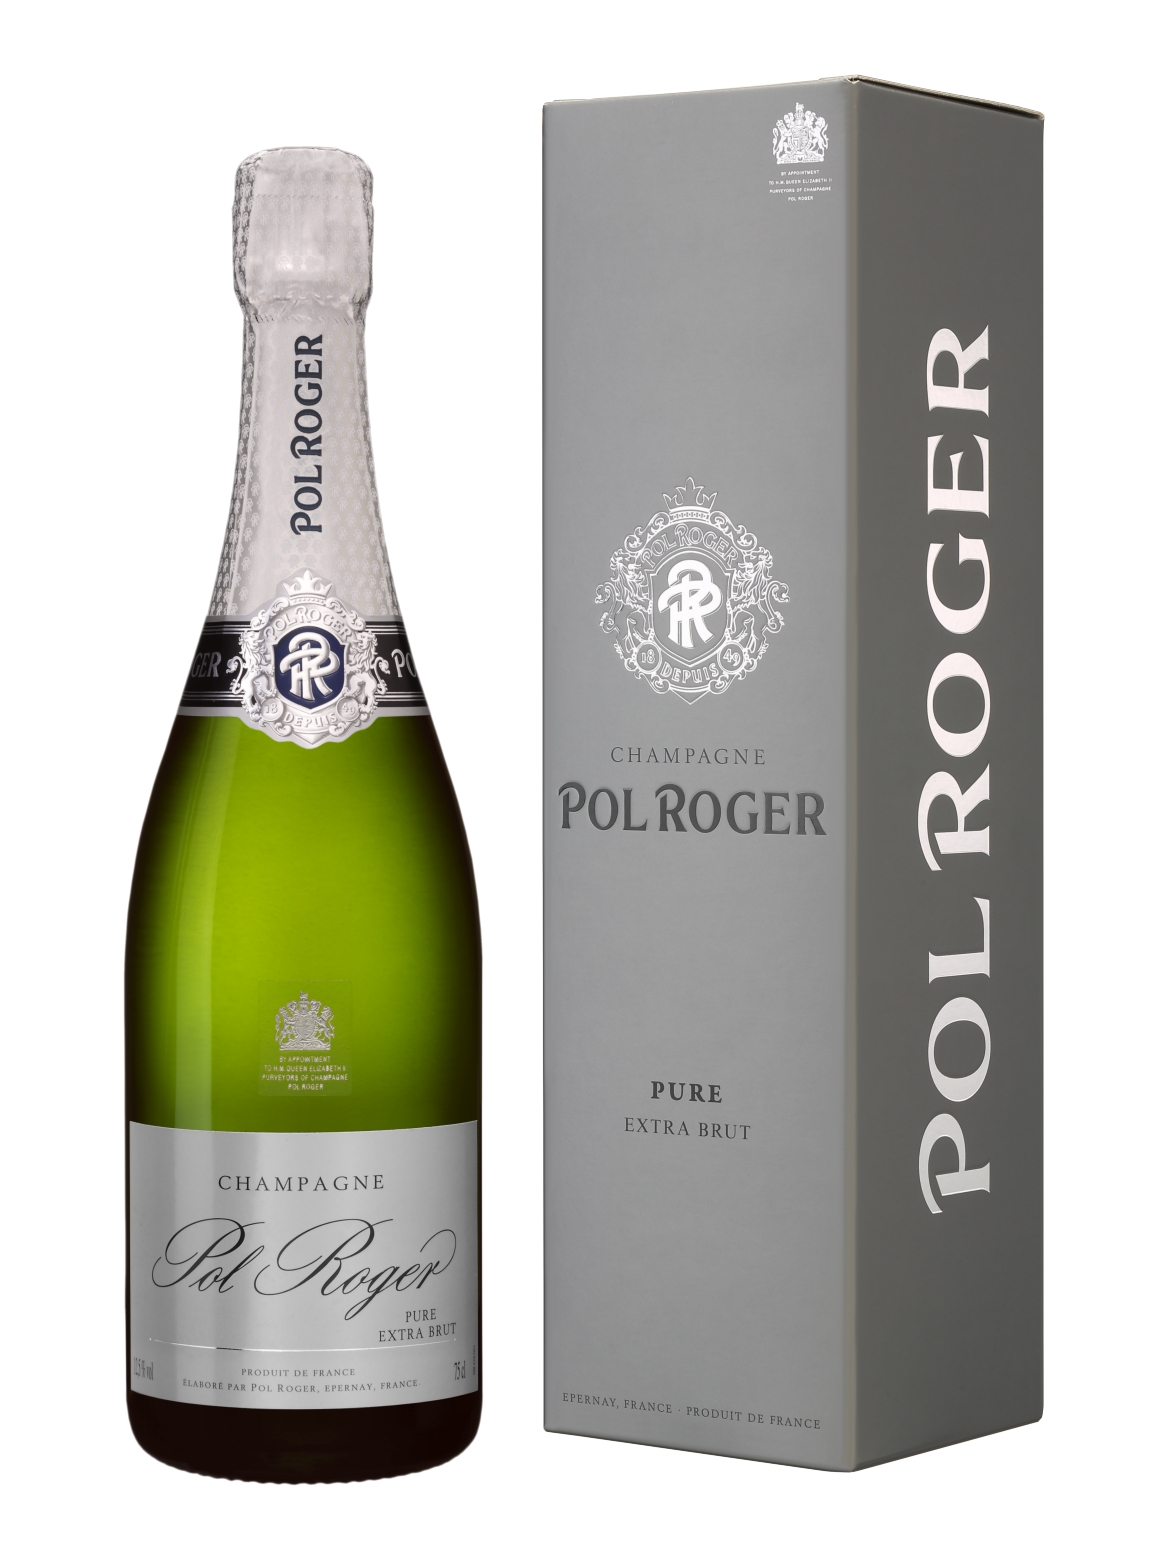 Champagne Pol Roger, Pure - Extra Brut GB